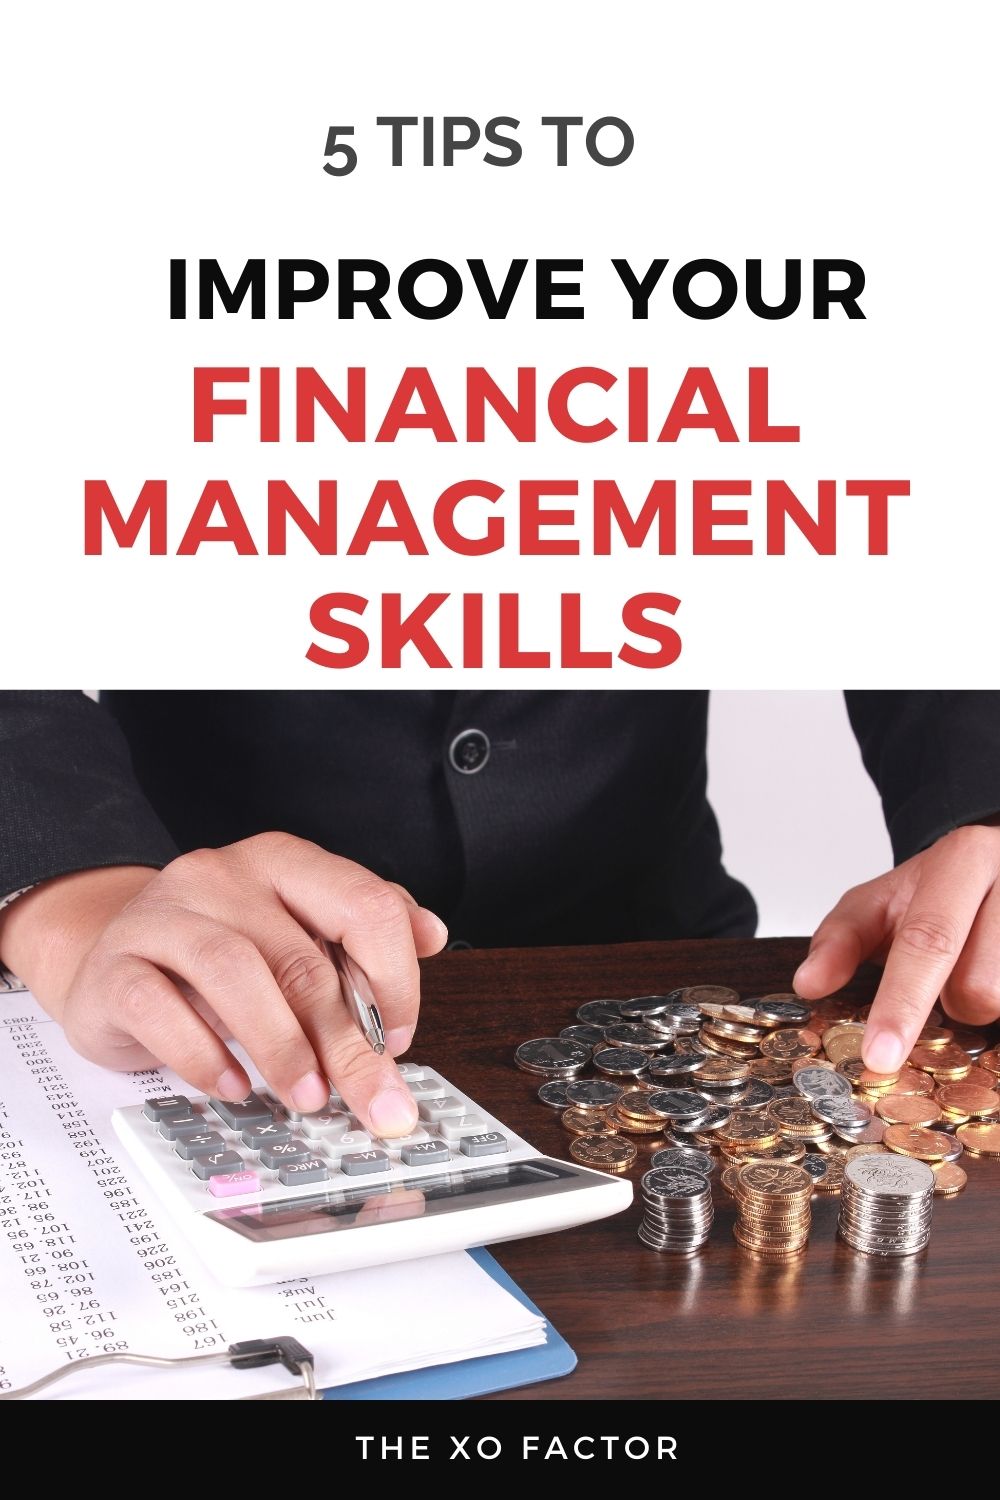 5 Tips To Improve Your Financial Management Skills